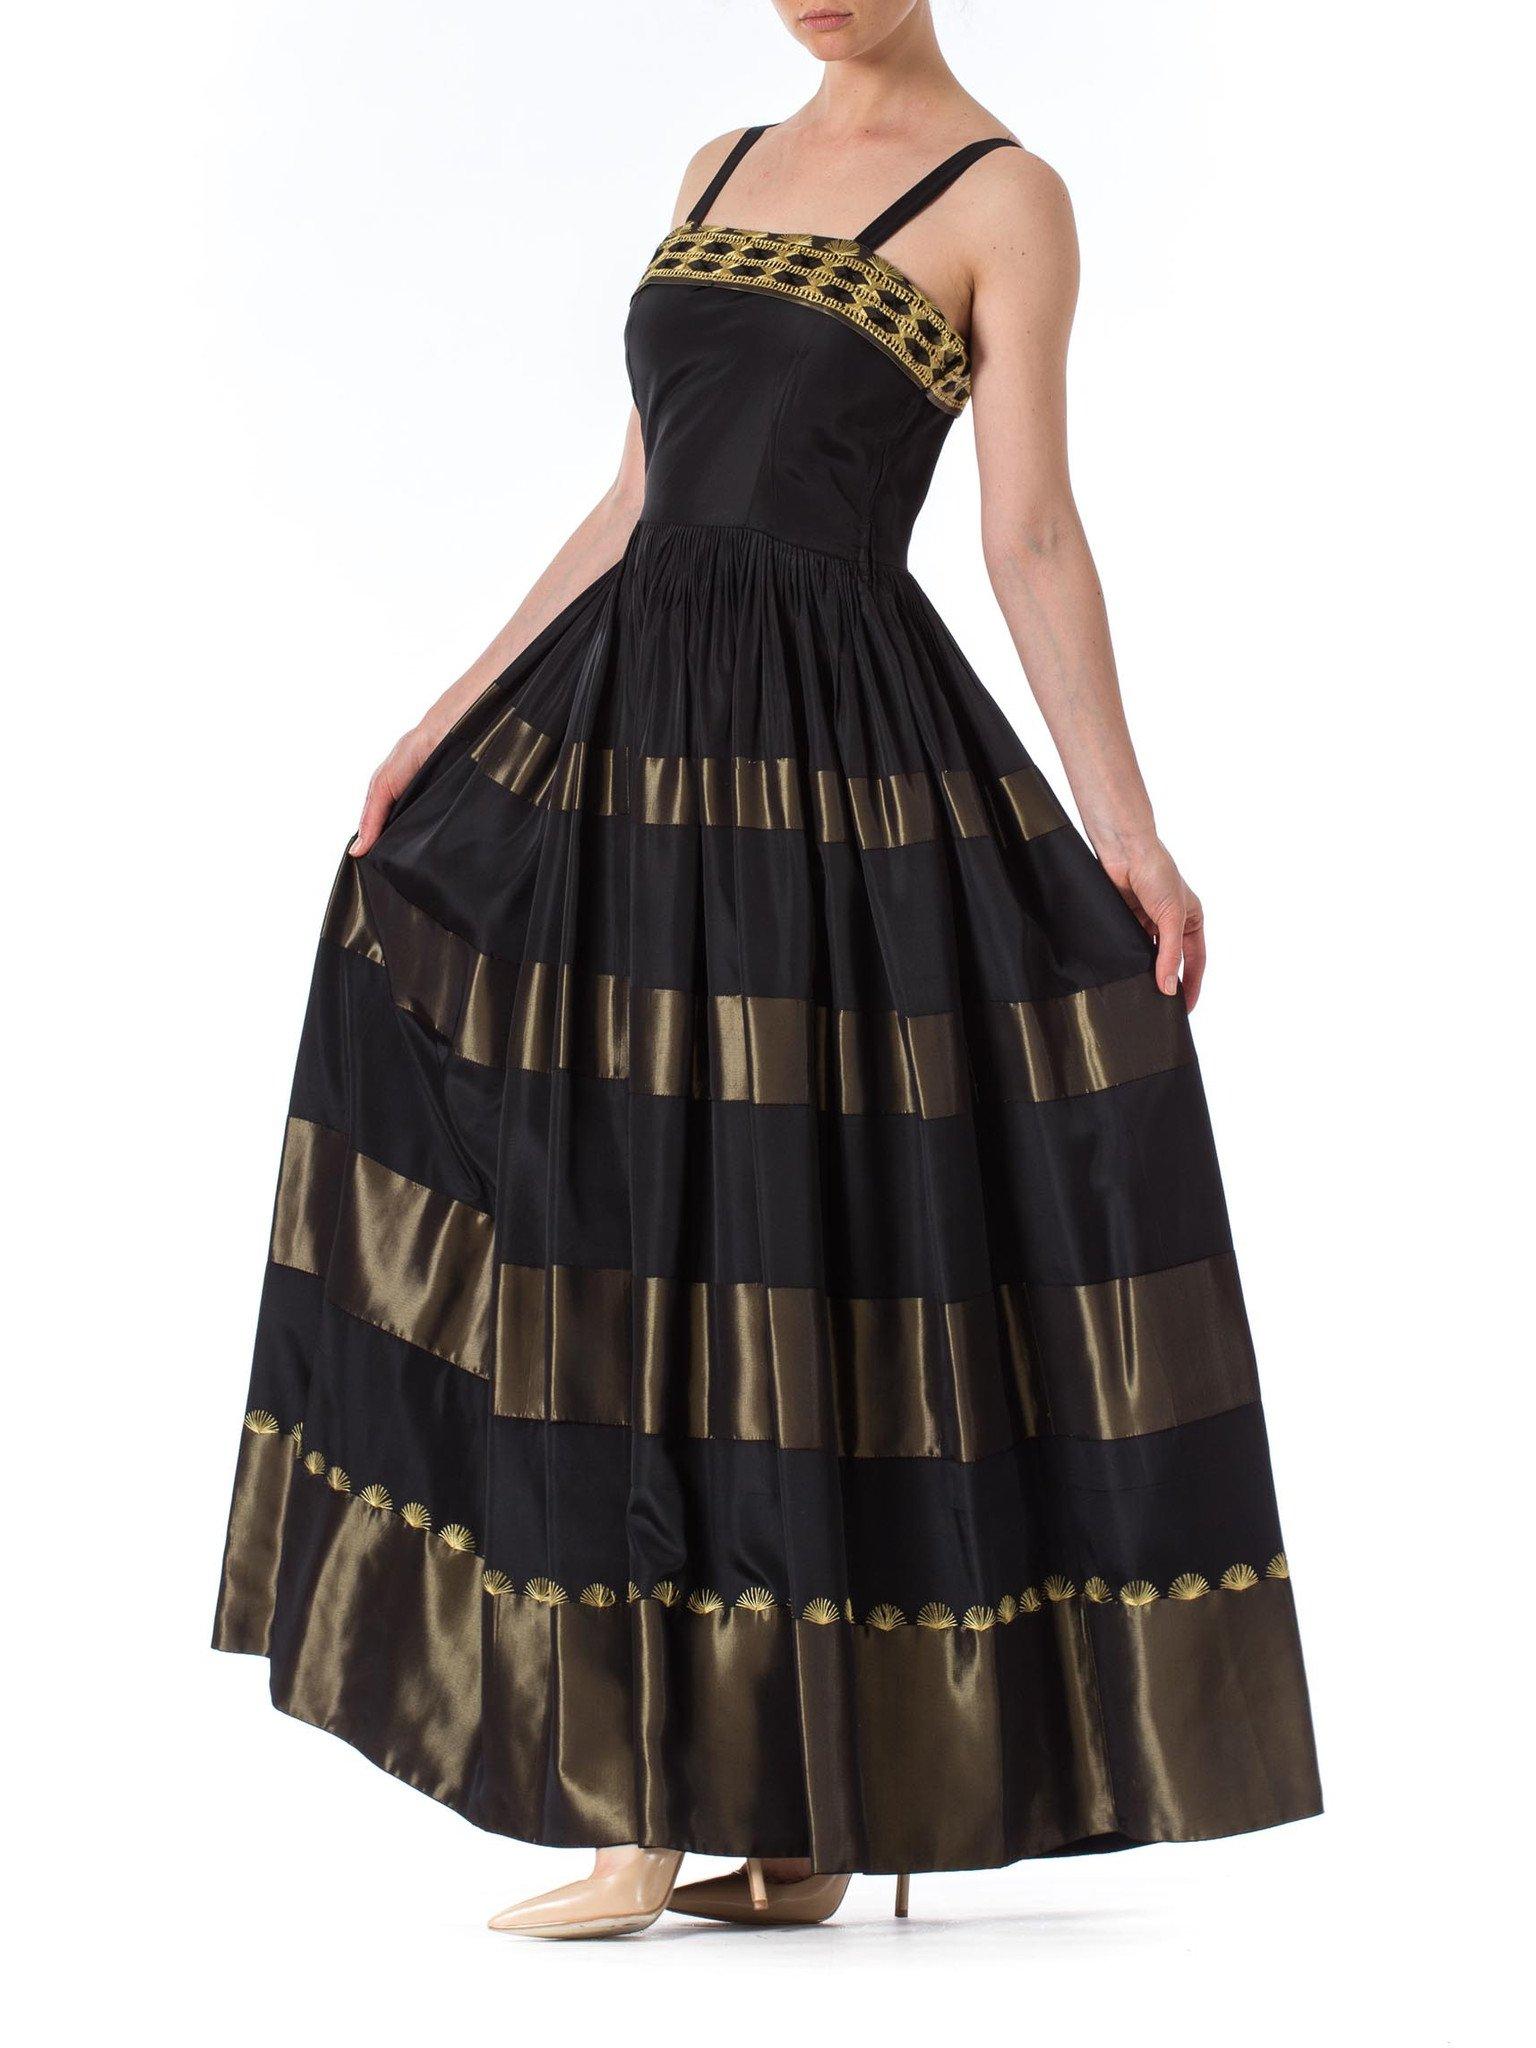 Women's 1940S Black & Gold Rayon Taffeta Ball Gown With Hand Embroidered Hem Bodice For Sale